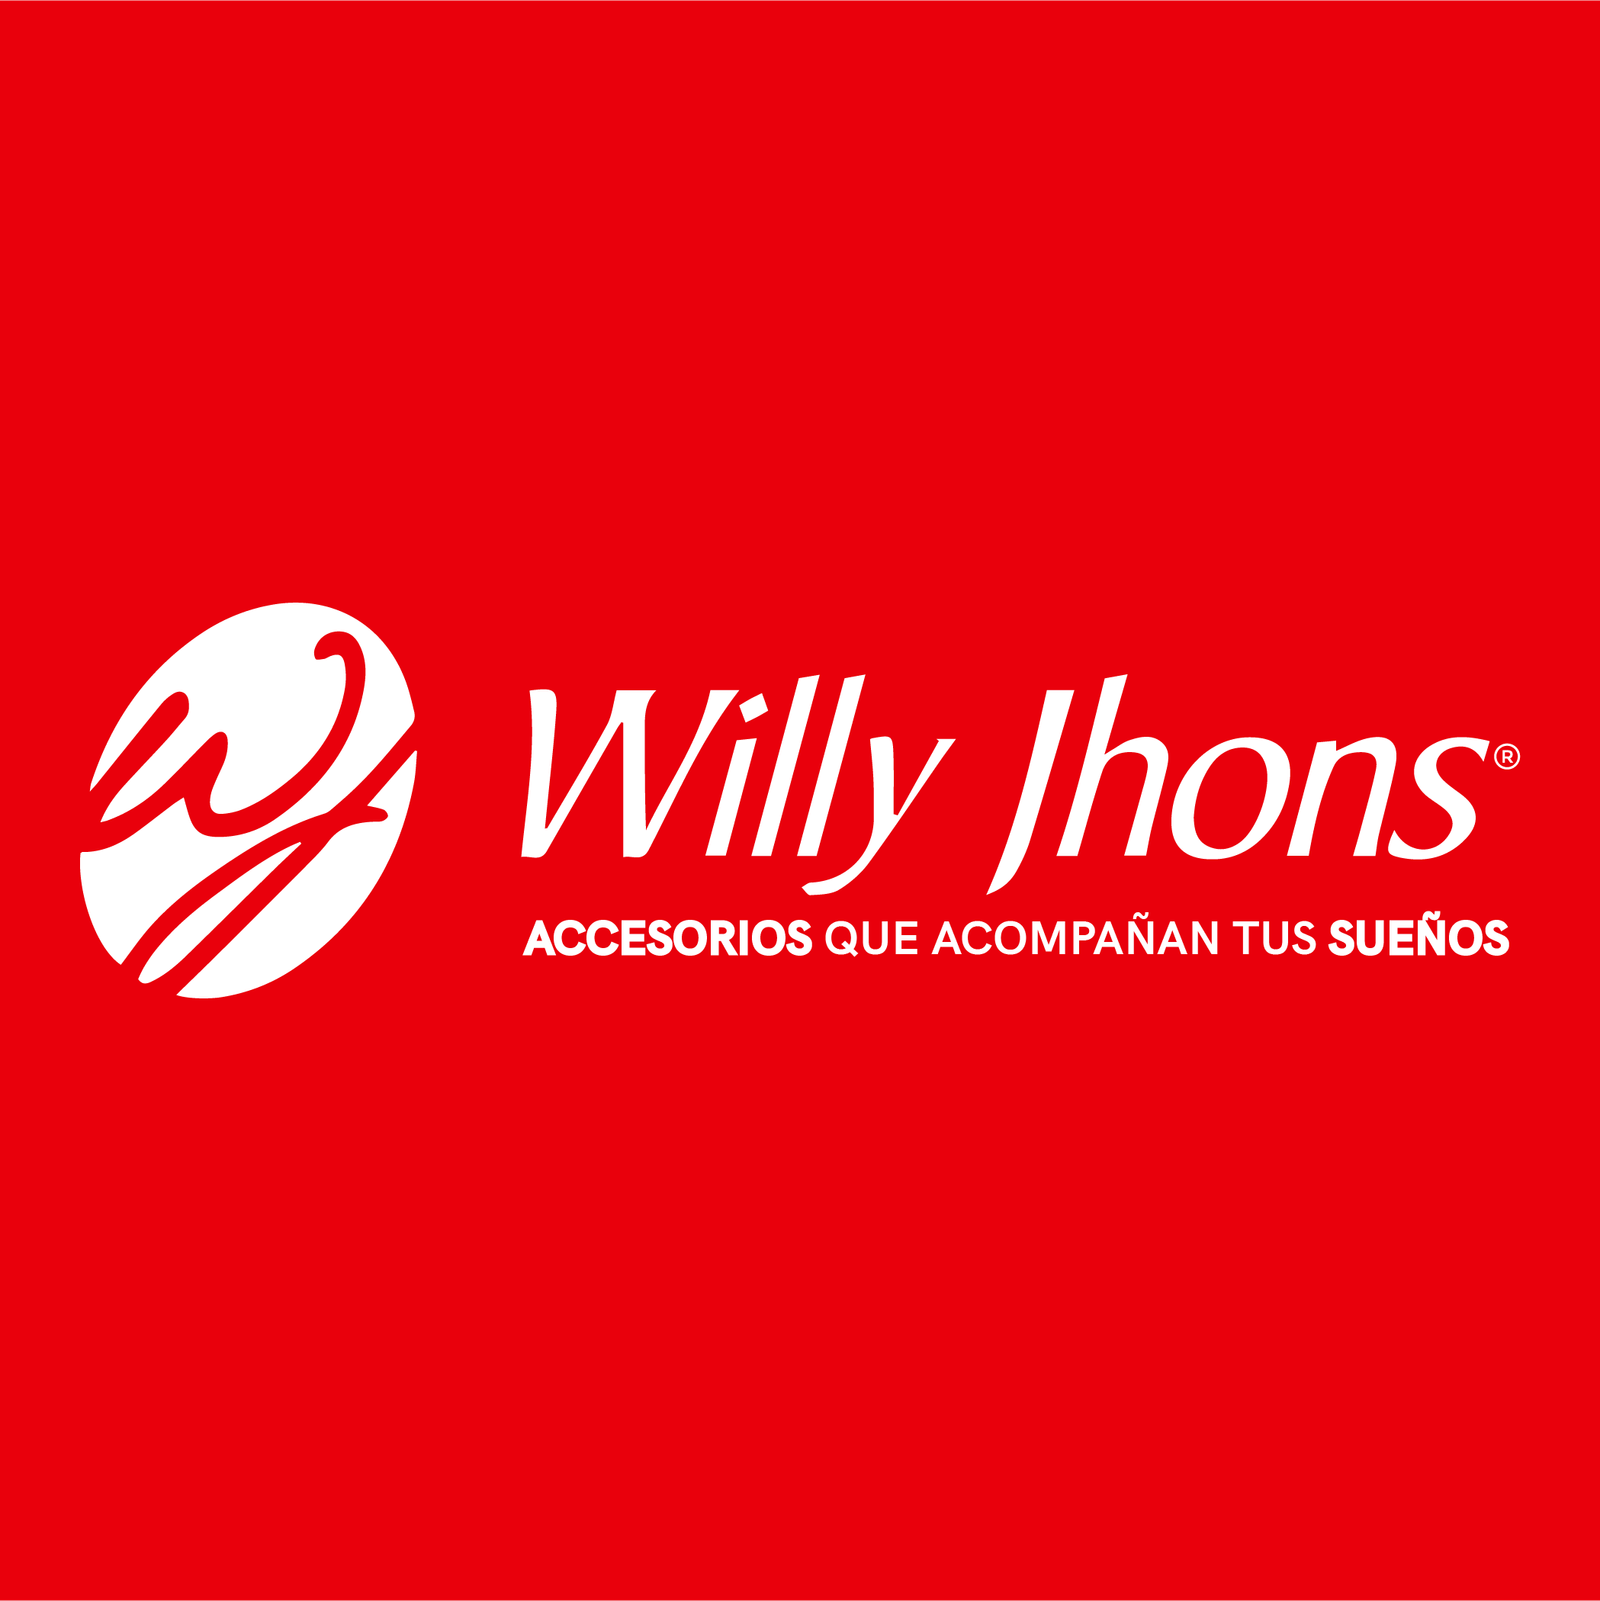 WILLY JHONS